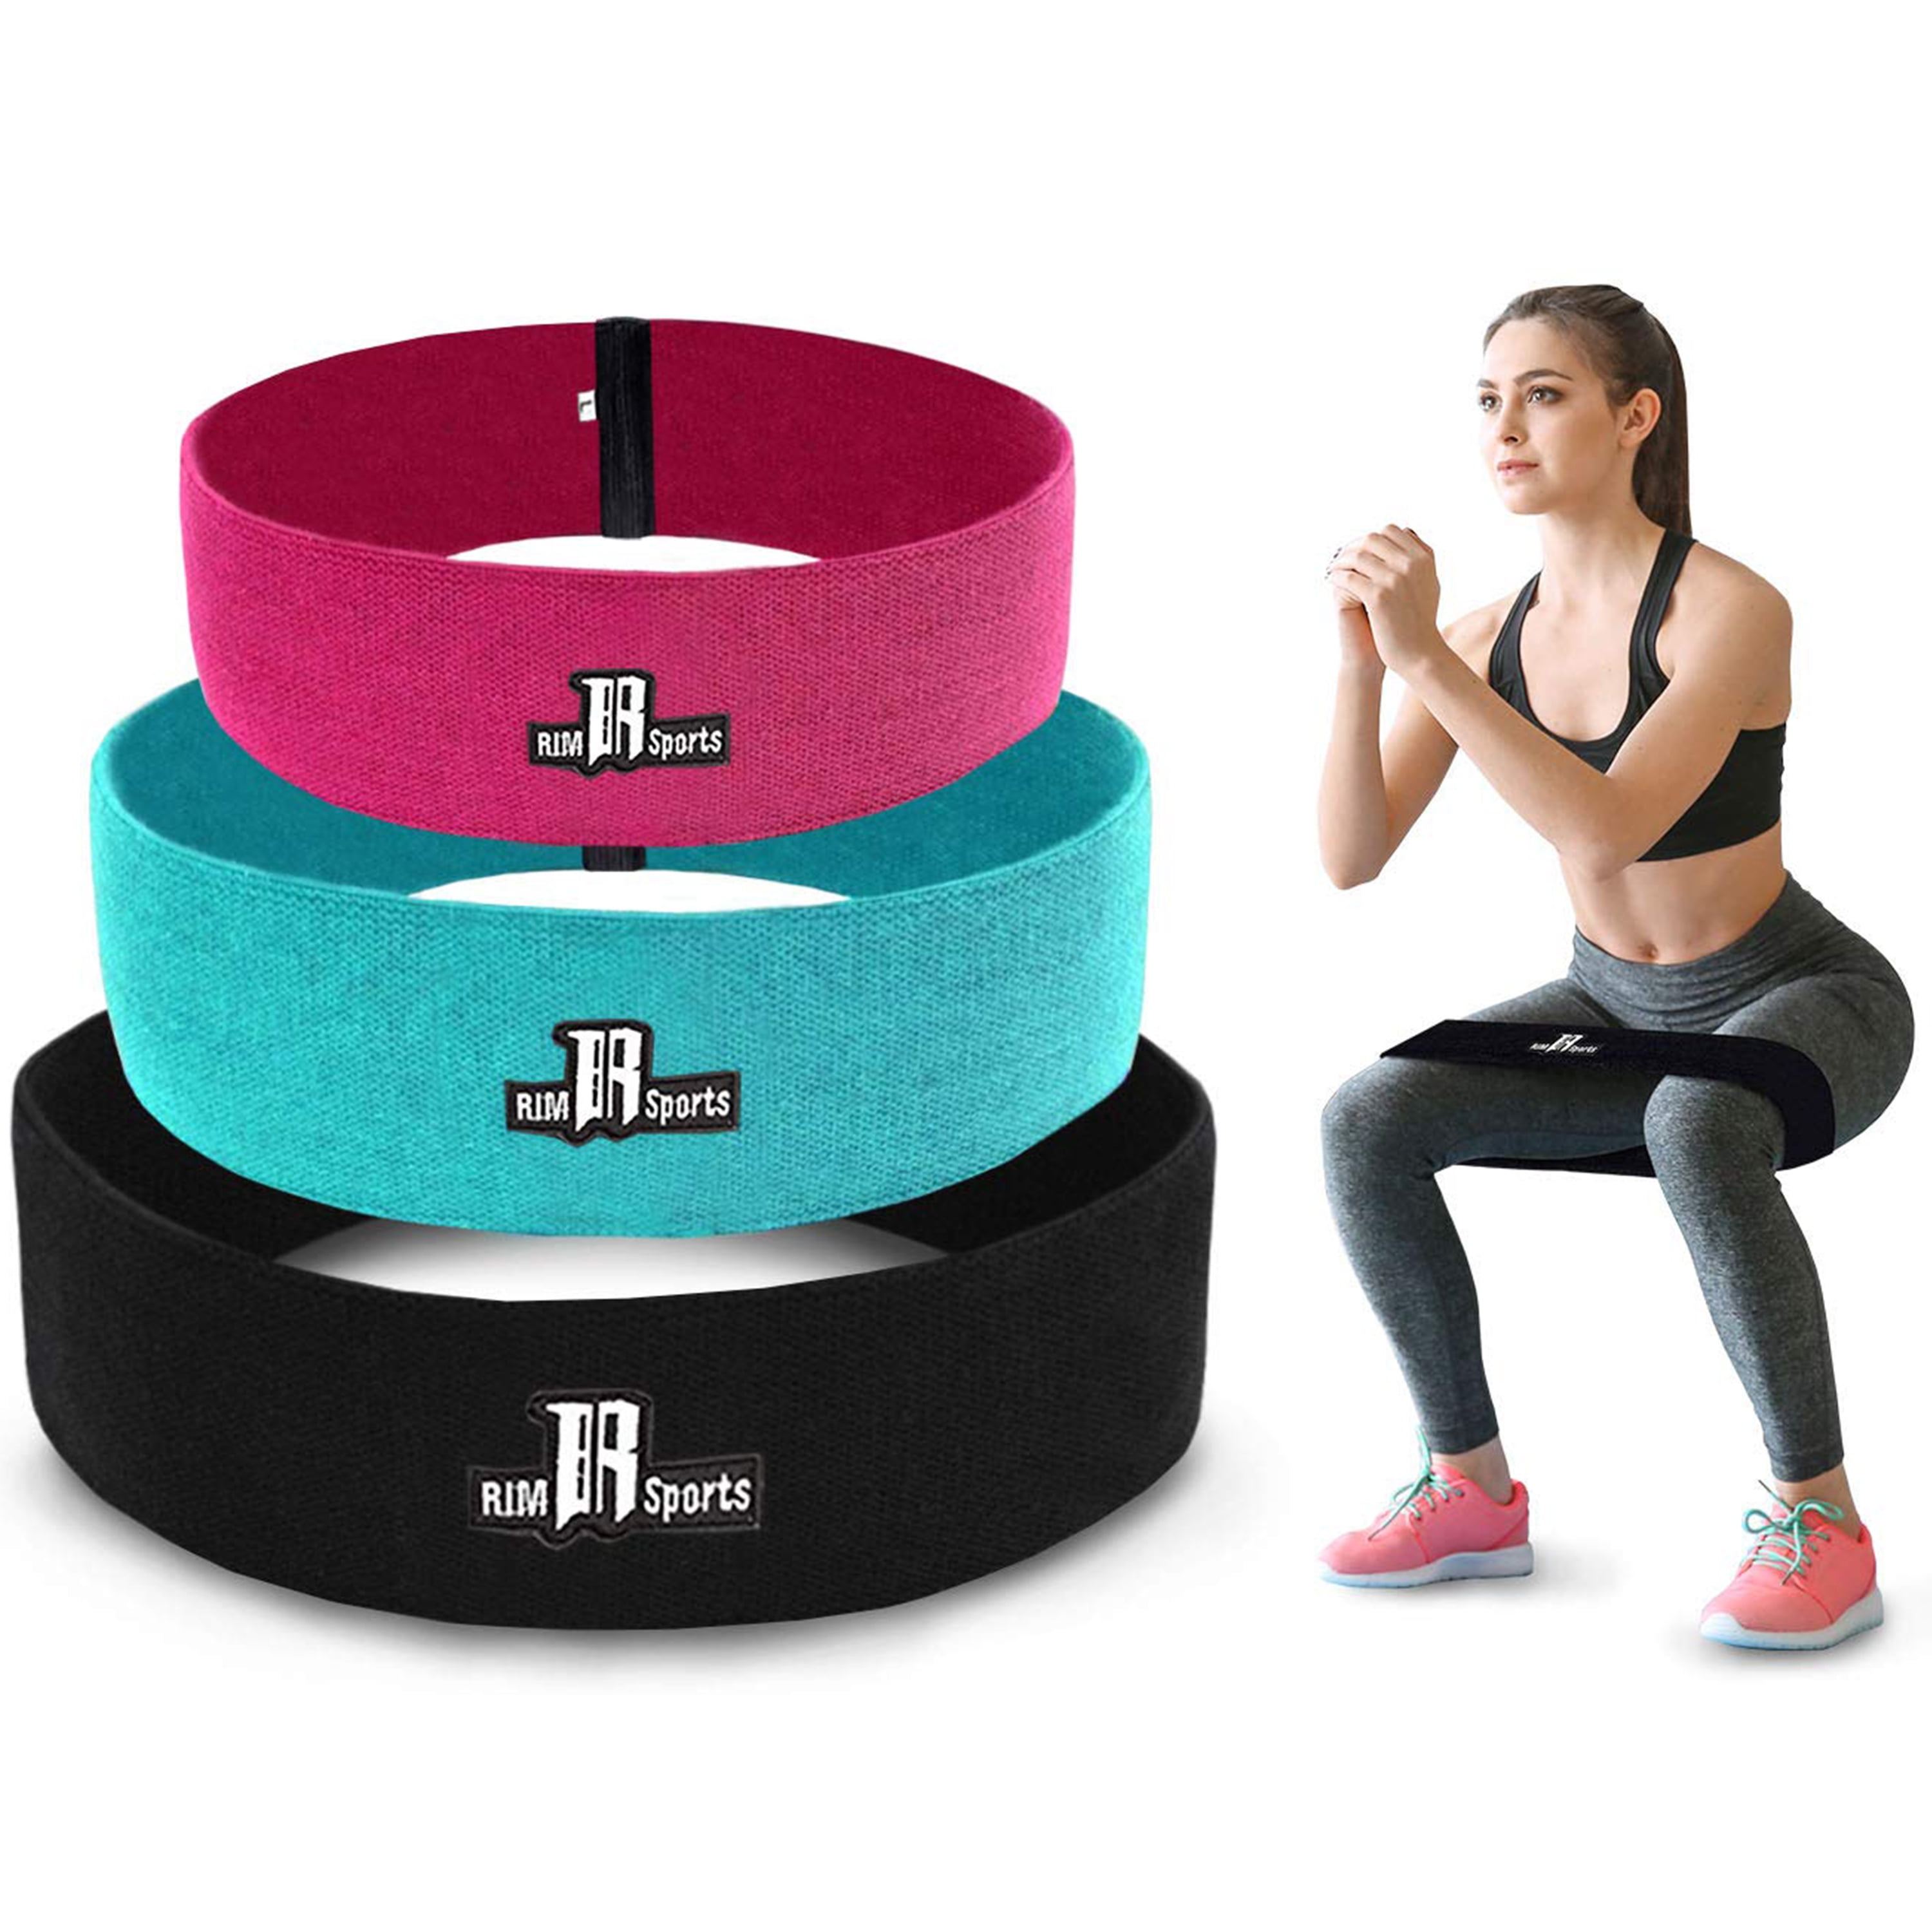 Exercise Bands for Glute and Booty Workouts, Xeefit Resistance Bands Set of 5 